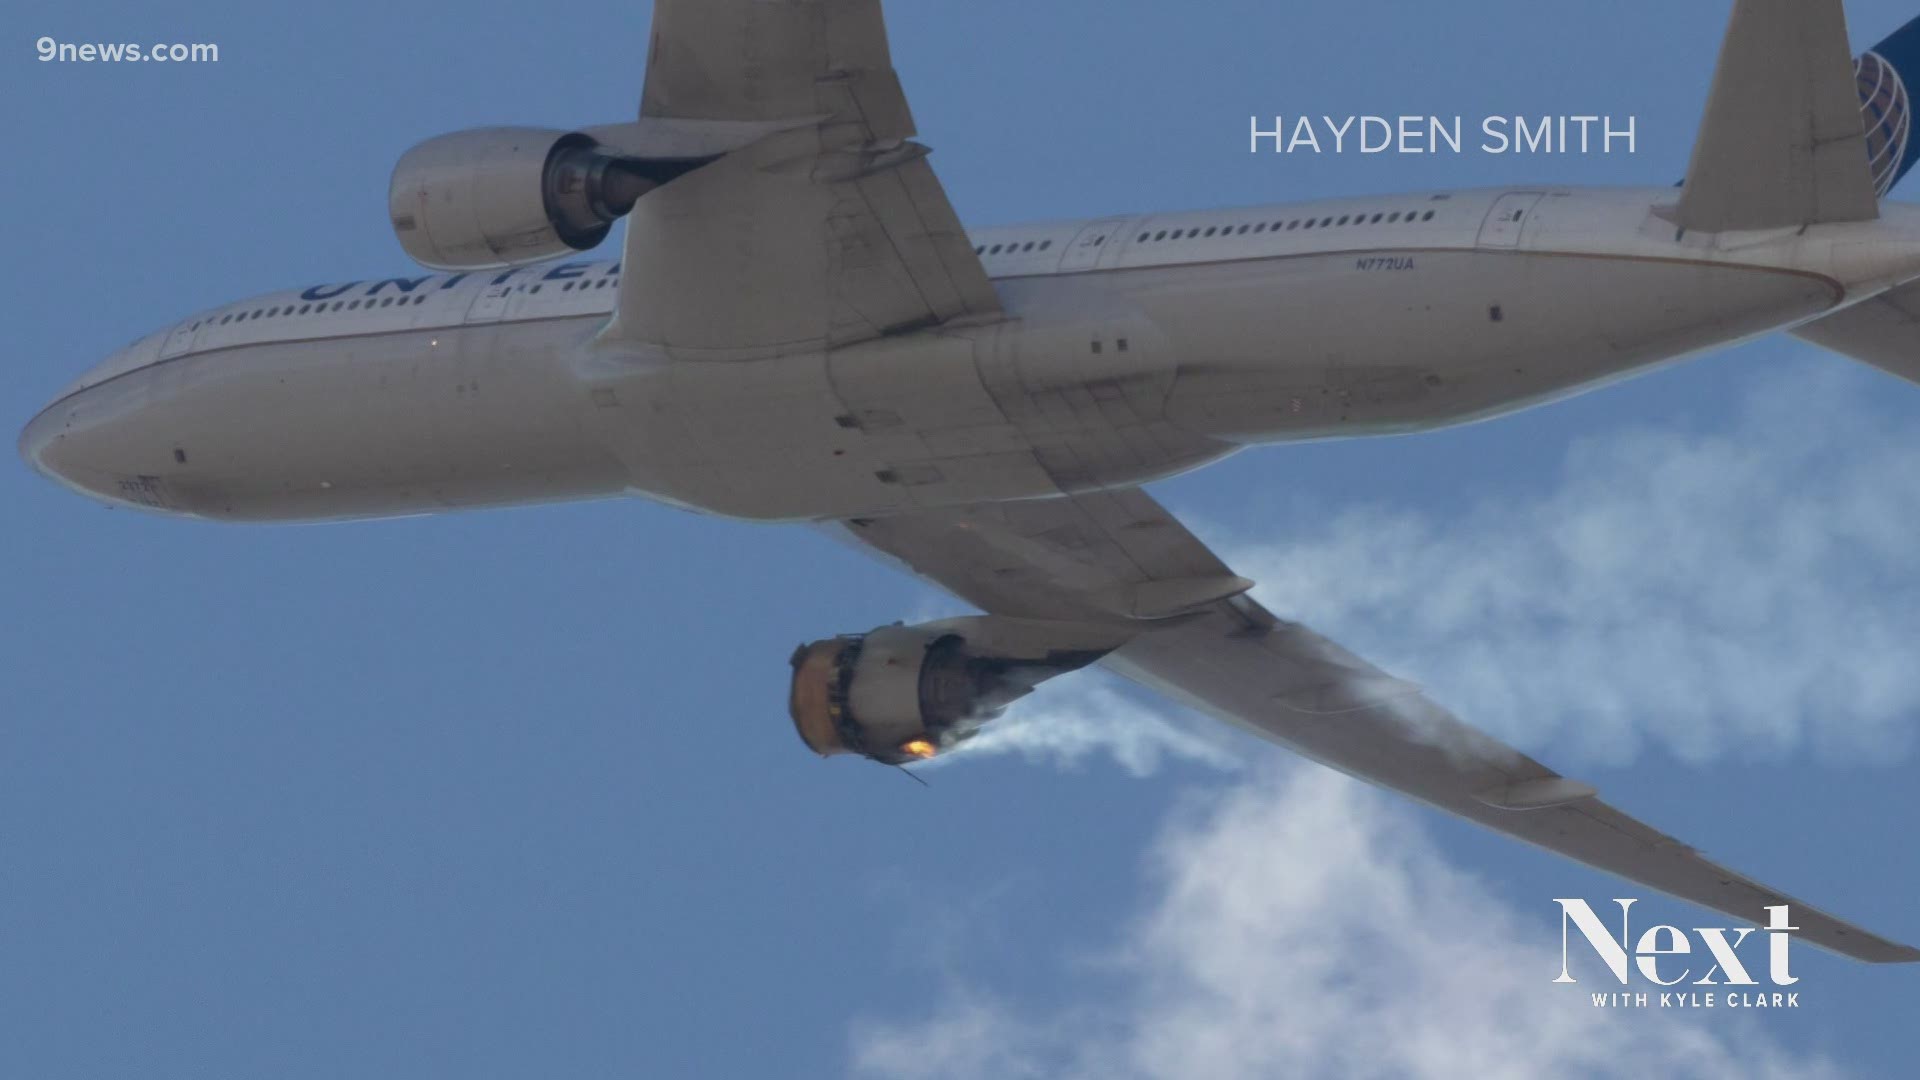 Some of the most striking images of Saturday's engine issue in the air came from Denver high schooler, Hayden Smith.